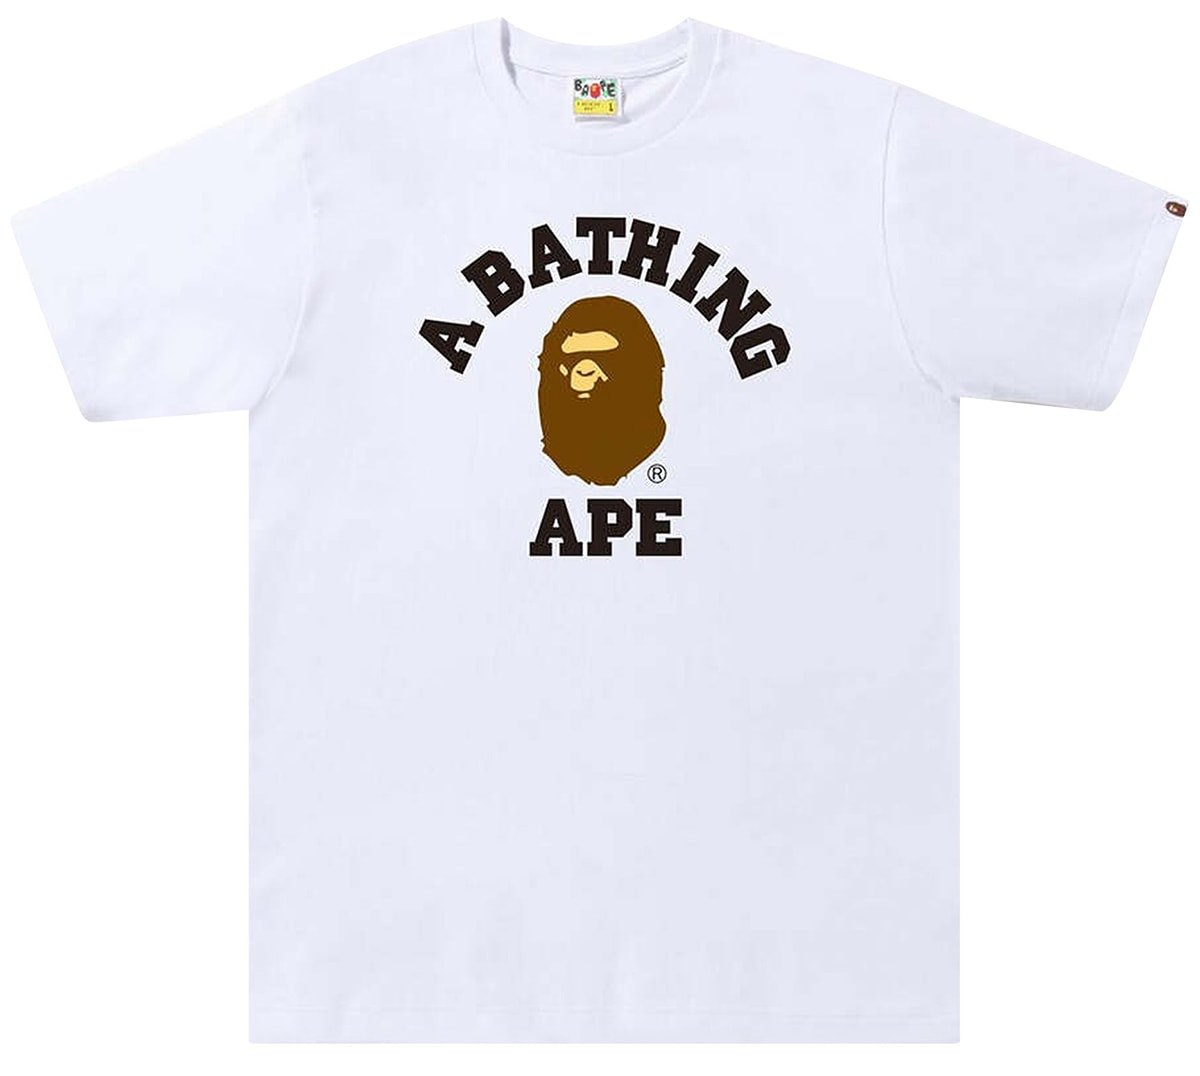 The Bape College Tee features A Bathing Ape's iconic motif, the ape head